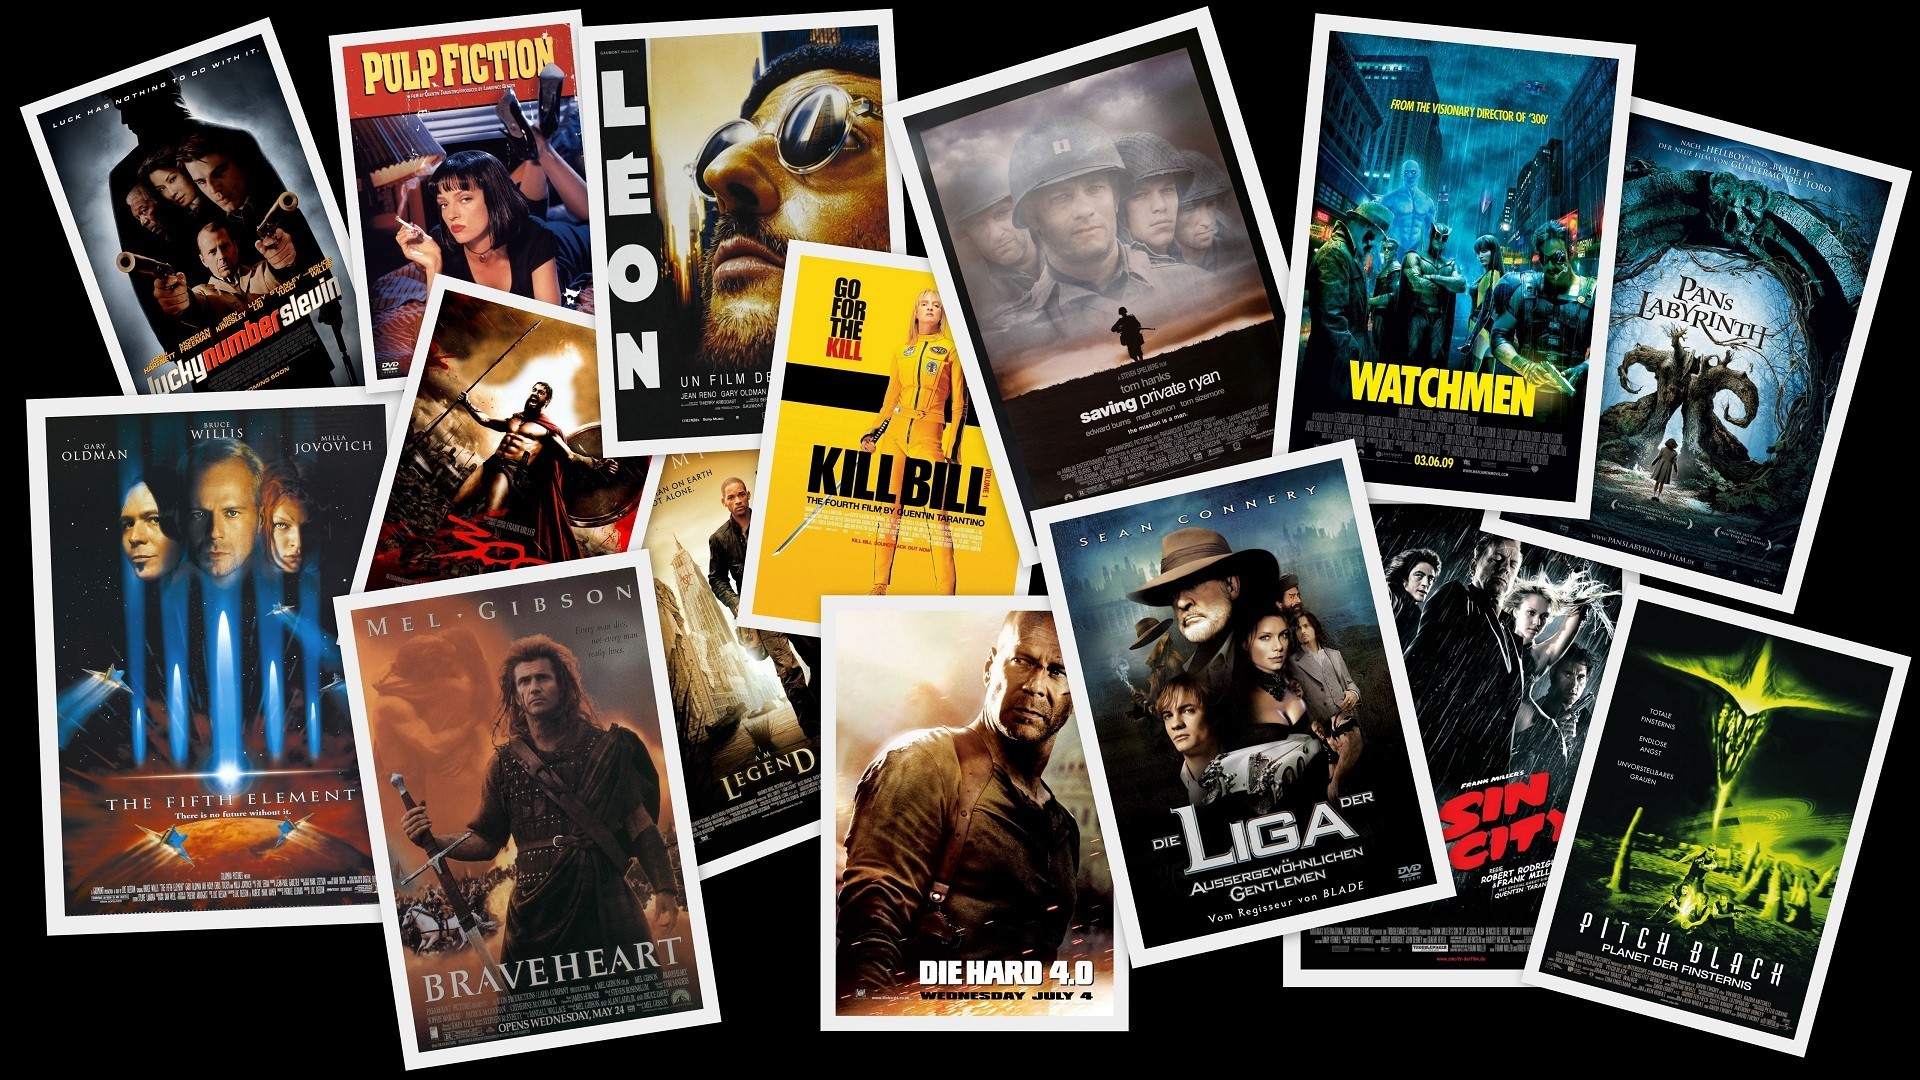 Movies2watch - You Can Find Anything Here From Blockbusters To Hidden Gems